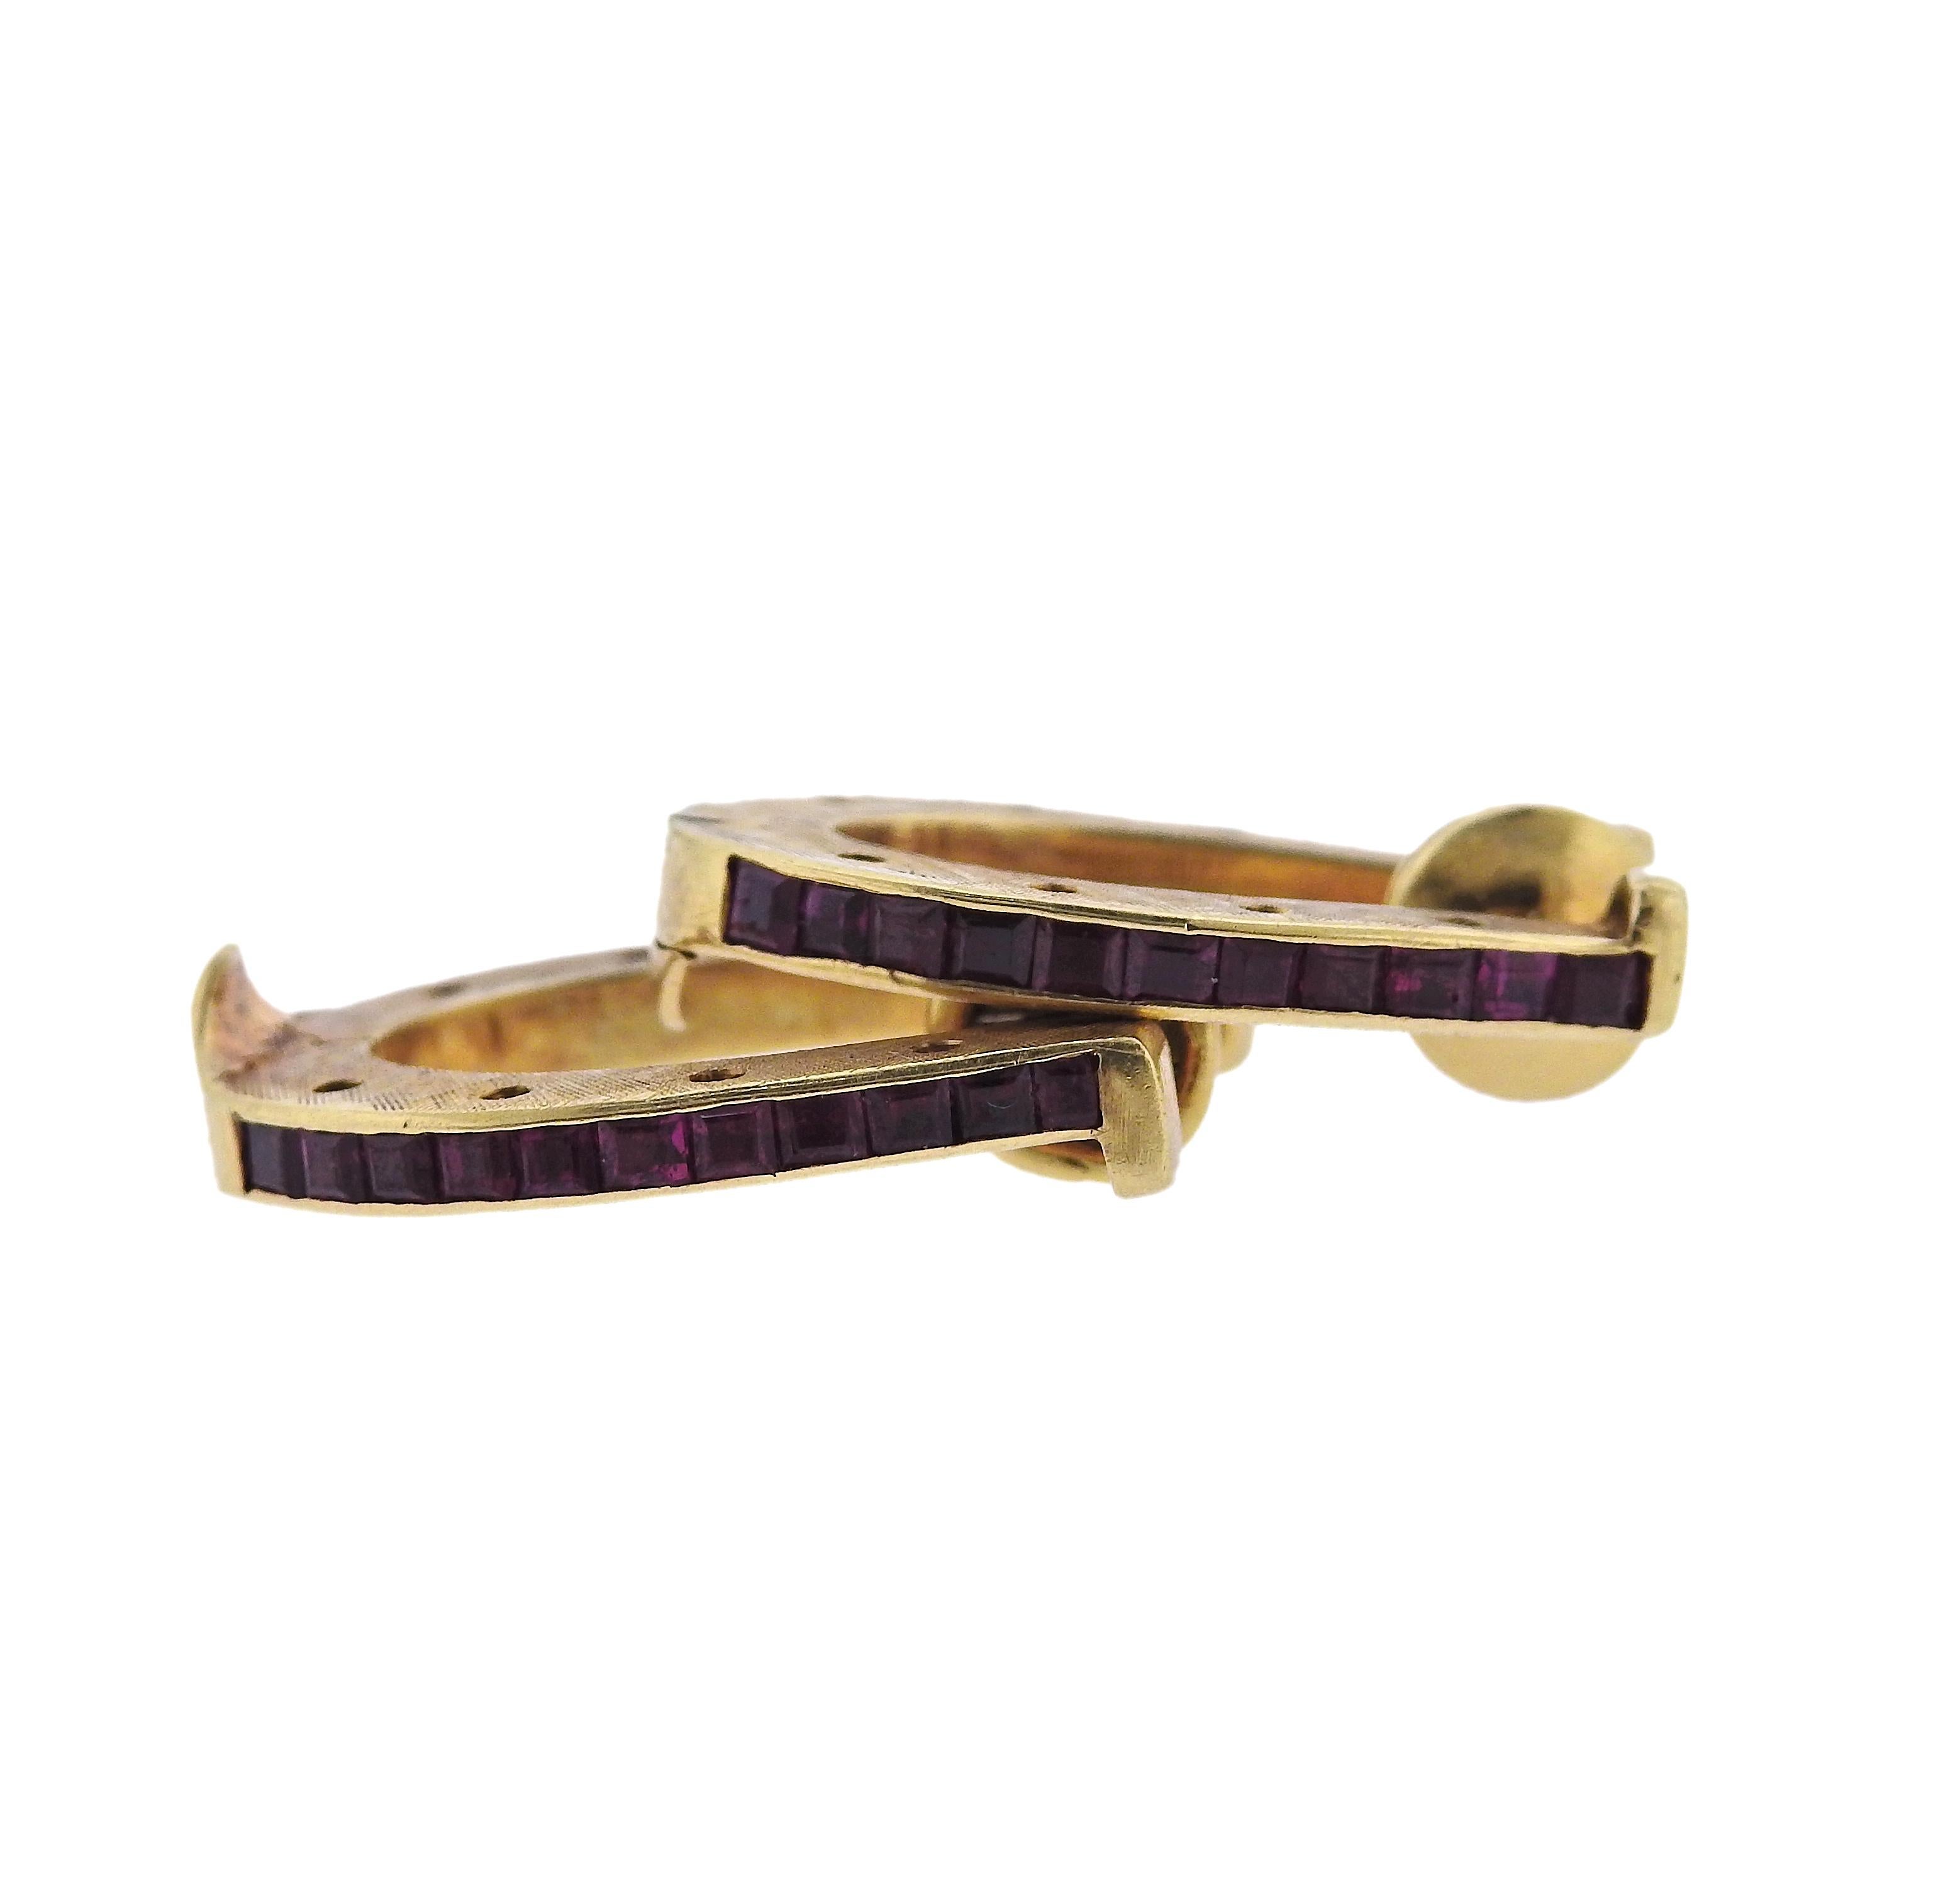 Pair of Midcentury 18k gold cufflinks by Cartier, with rubies and approx. 0.70ctw G/VS diamonds. Cufflink measures 25mm x 20mm, one cufflink is slightly bent on the side,   width 3mm. Marked: Cartier, 18k,  28267.  Weight - 14.6 grams. 